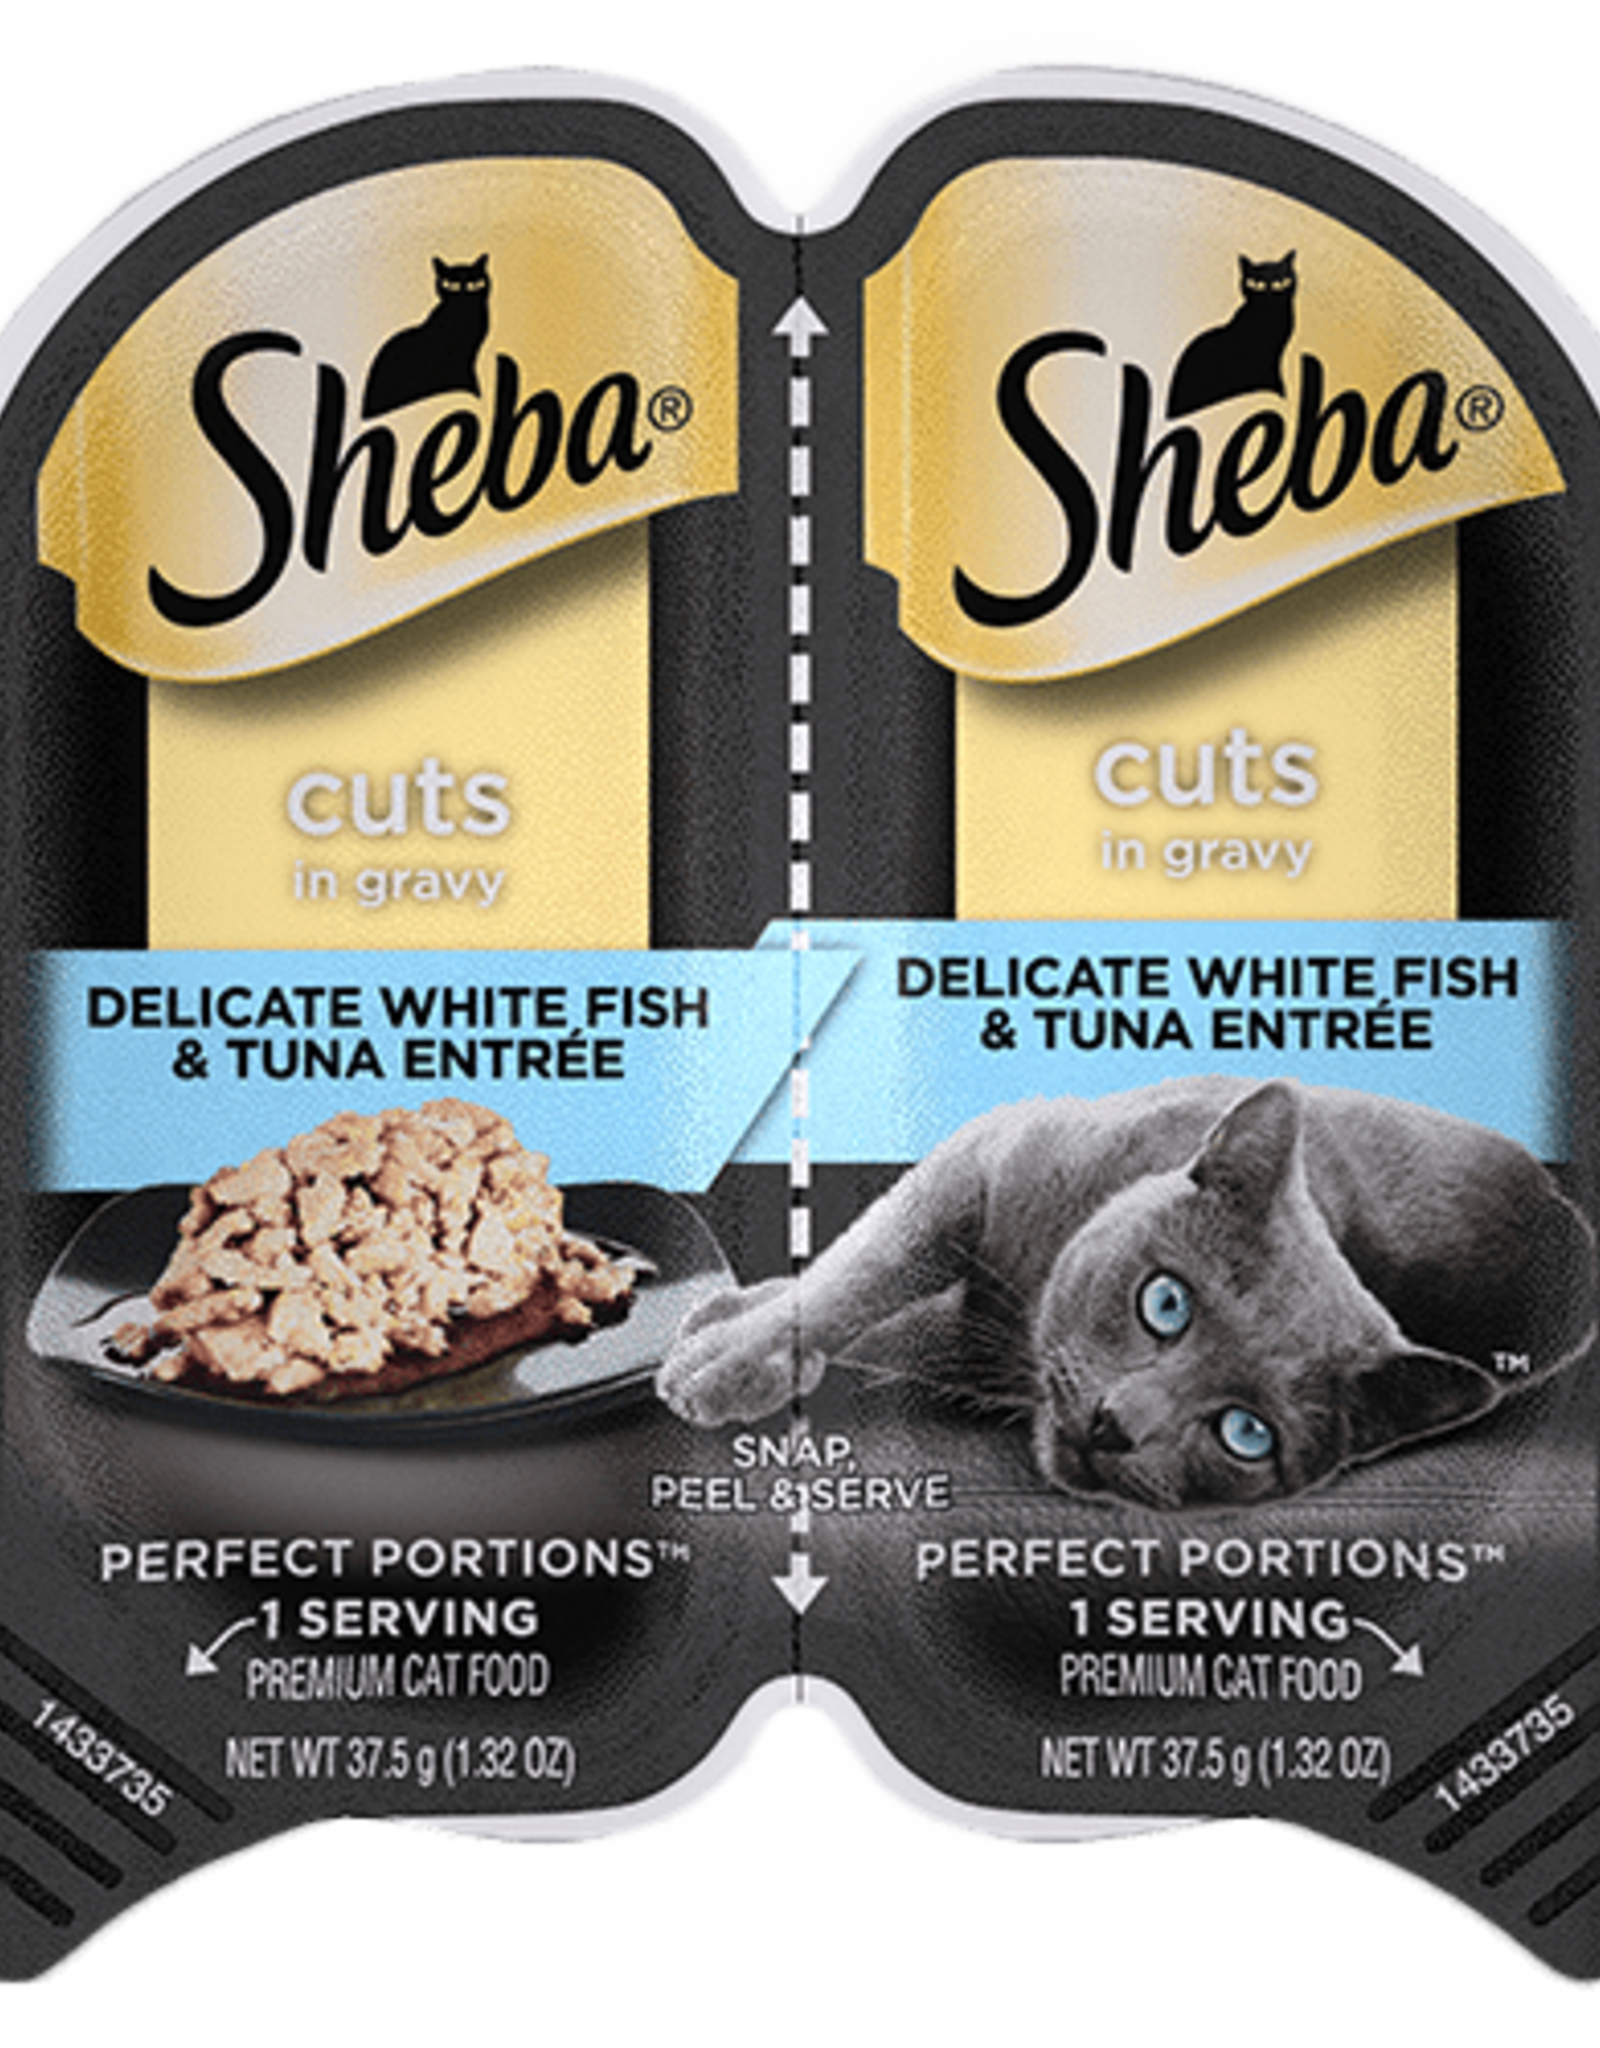 MARS PET CARE SHEBA PERFECT PORTIONS WHITEFISH & TUNA CUTS 2.6OZ CASE OF 24